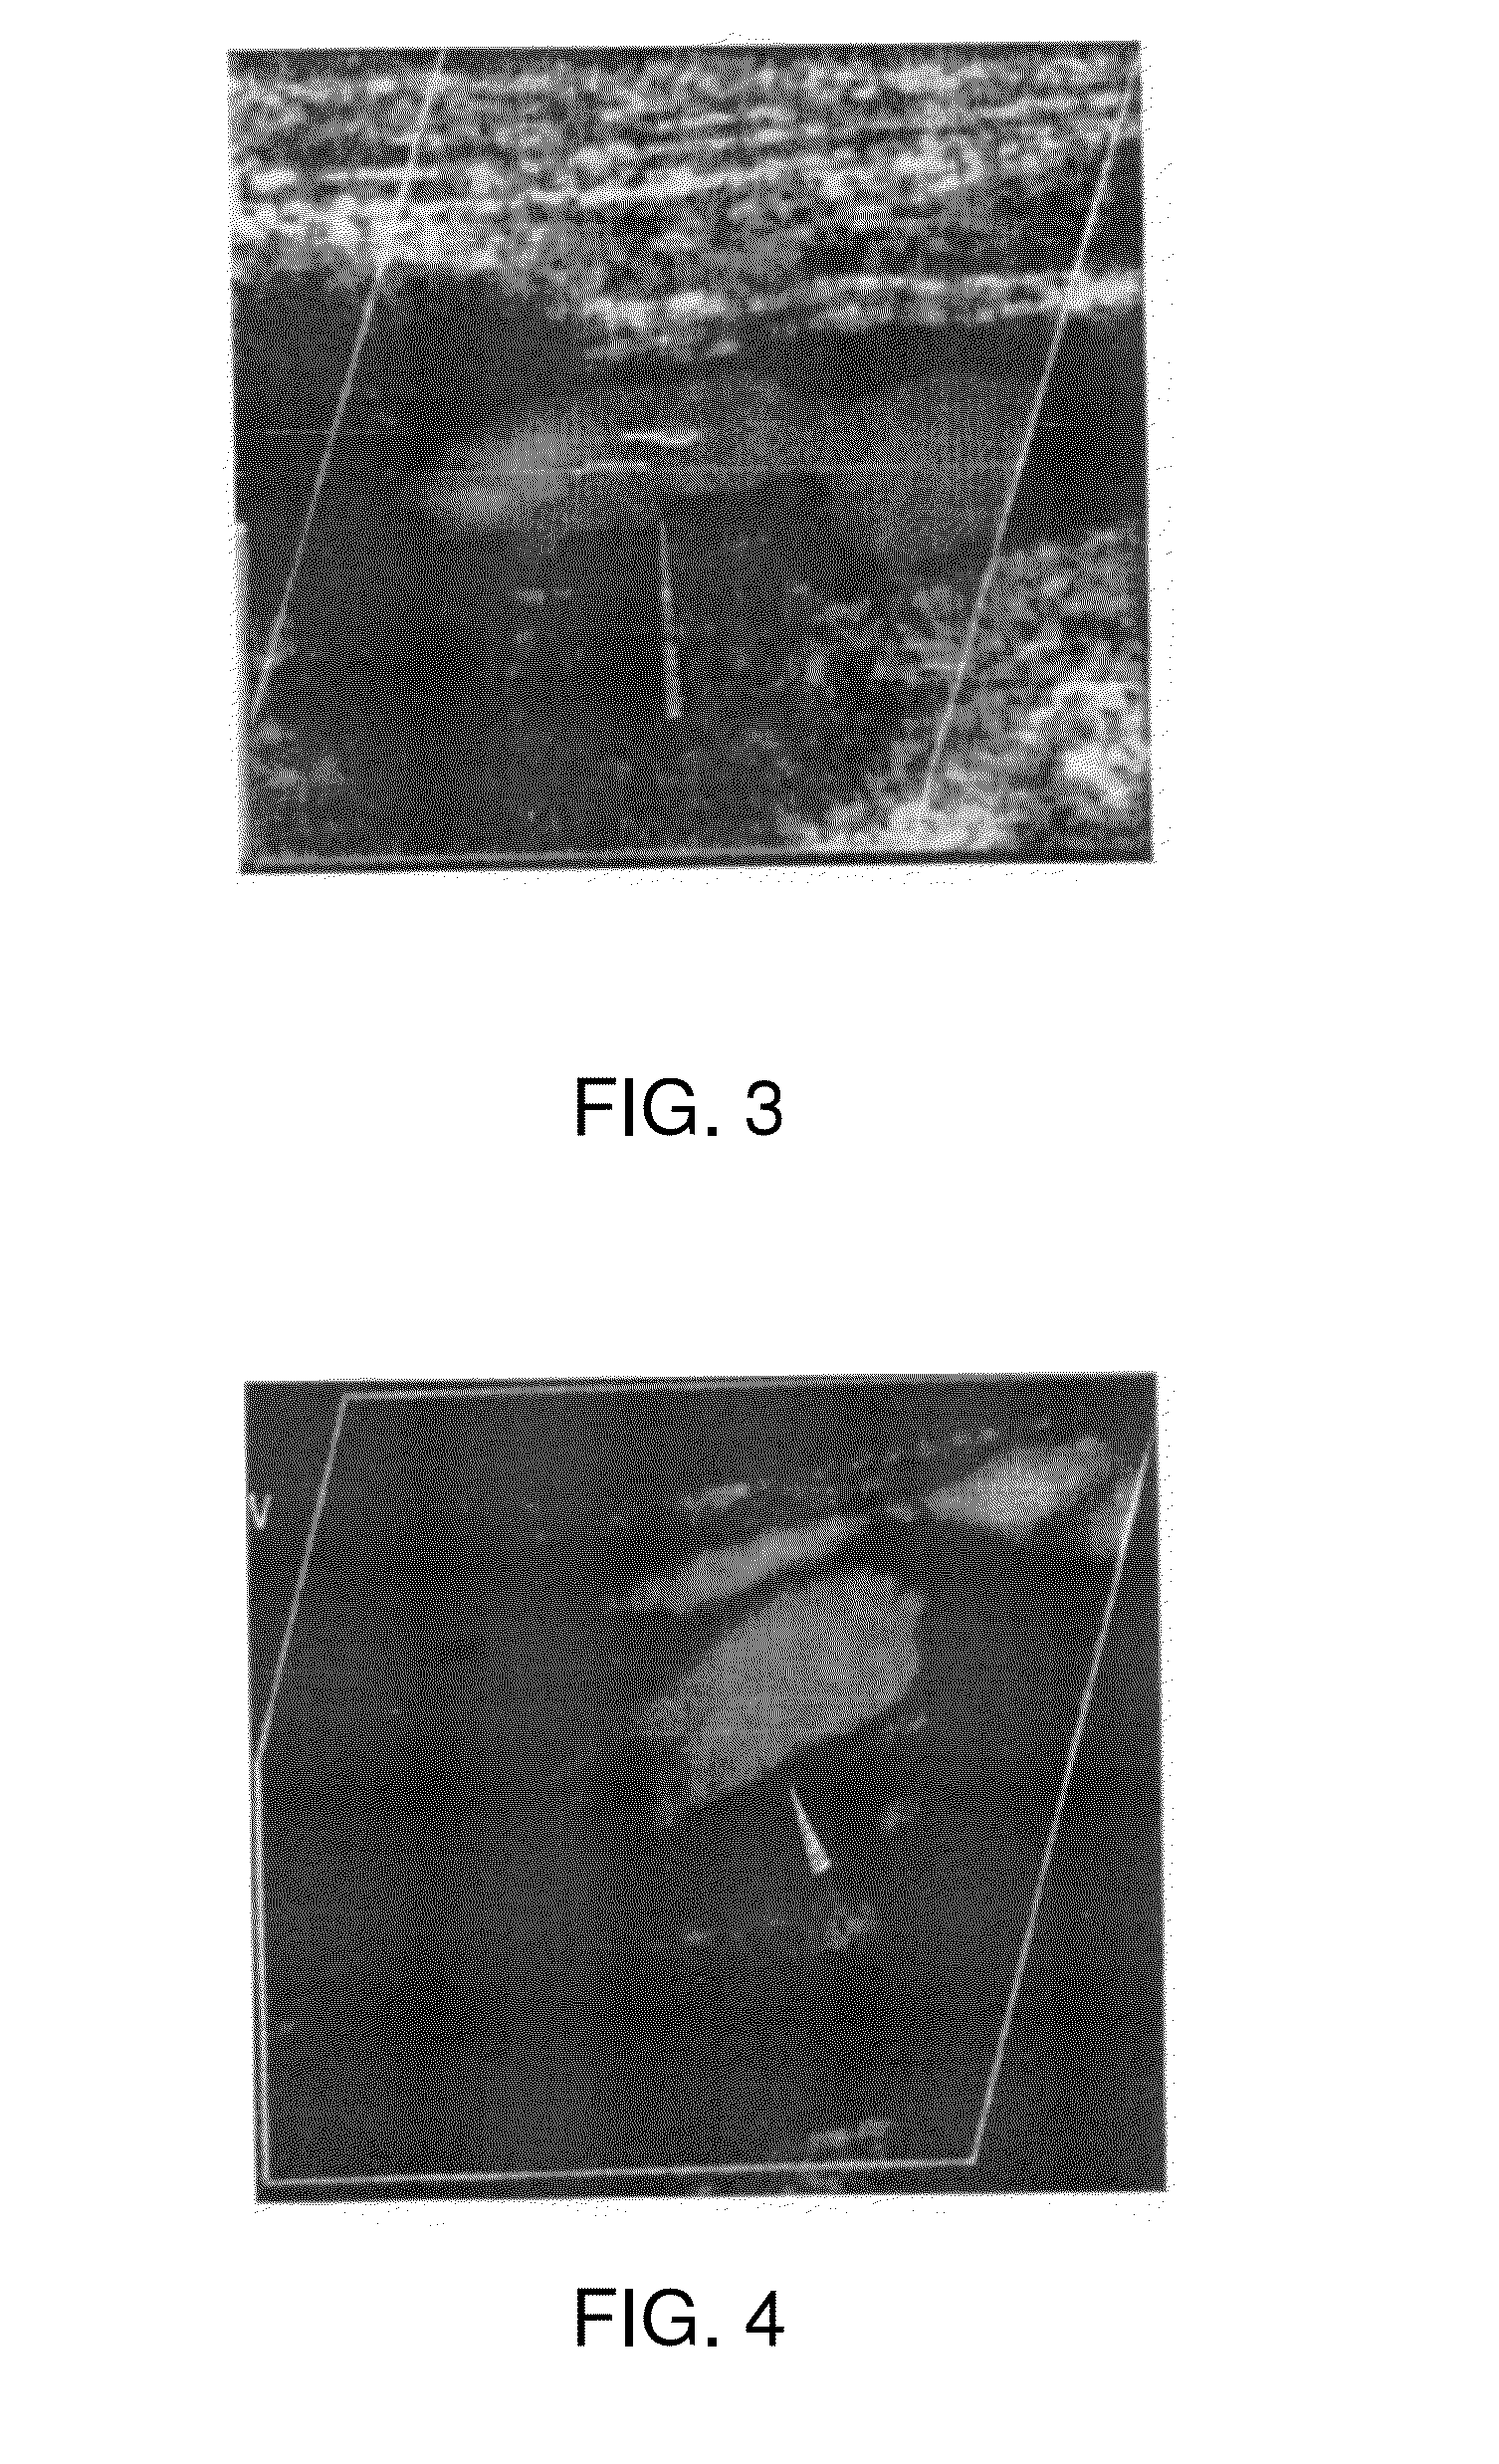 Herbal polypharmaceutical for preventing and treating atherosclerosis